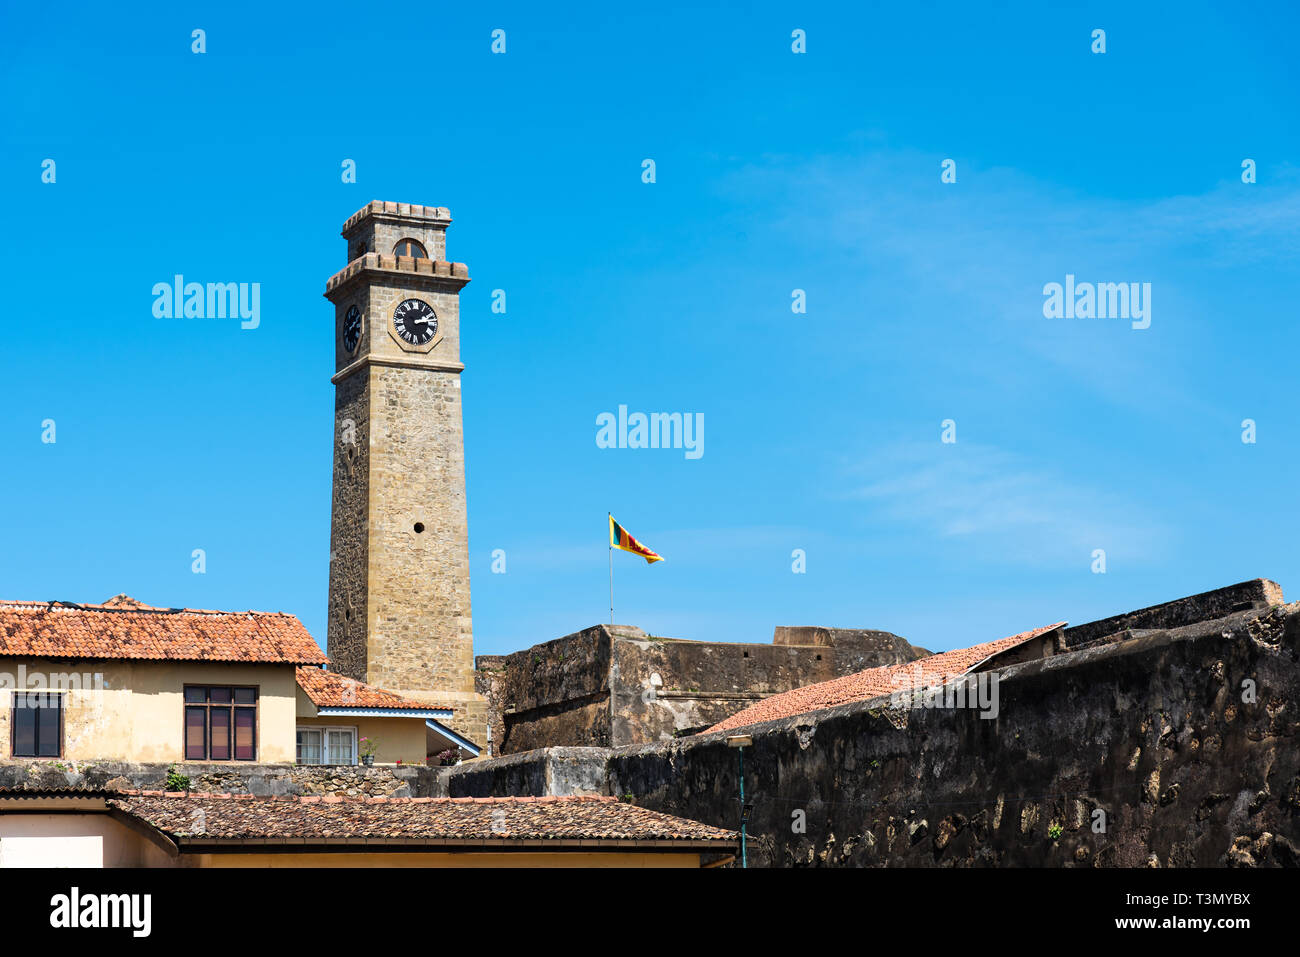 Galle fort clock tower in Sri Lanka on a sunny day Stock Photo